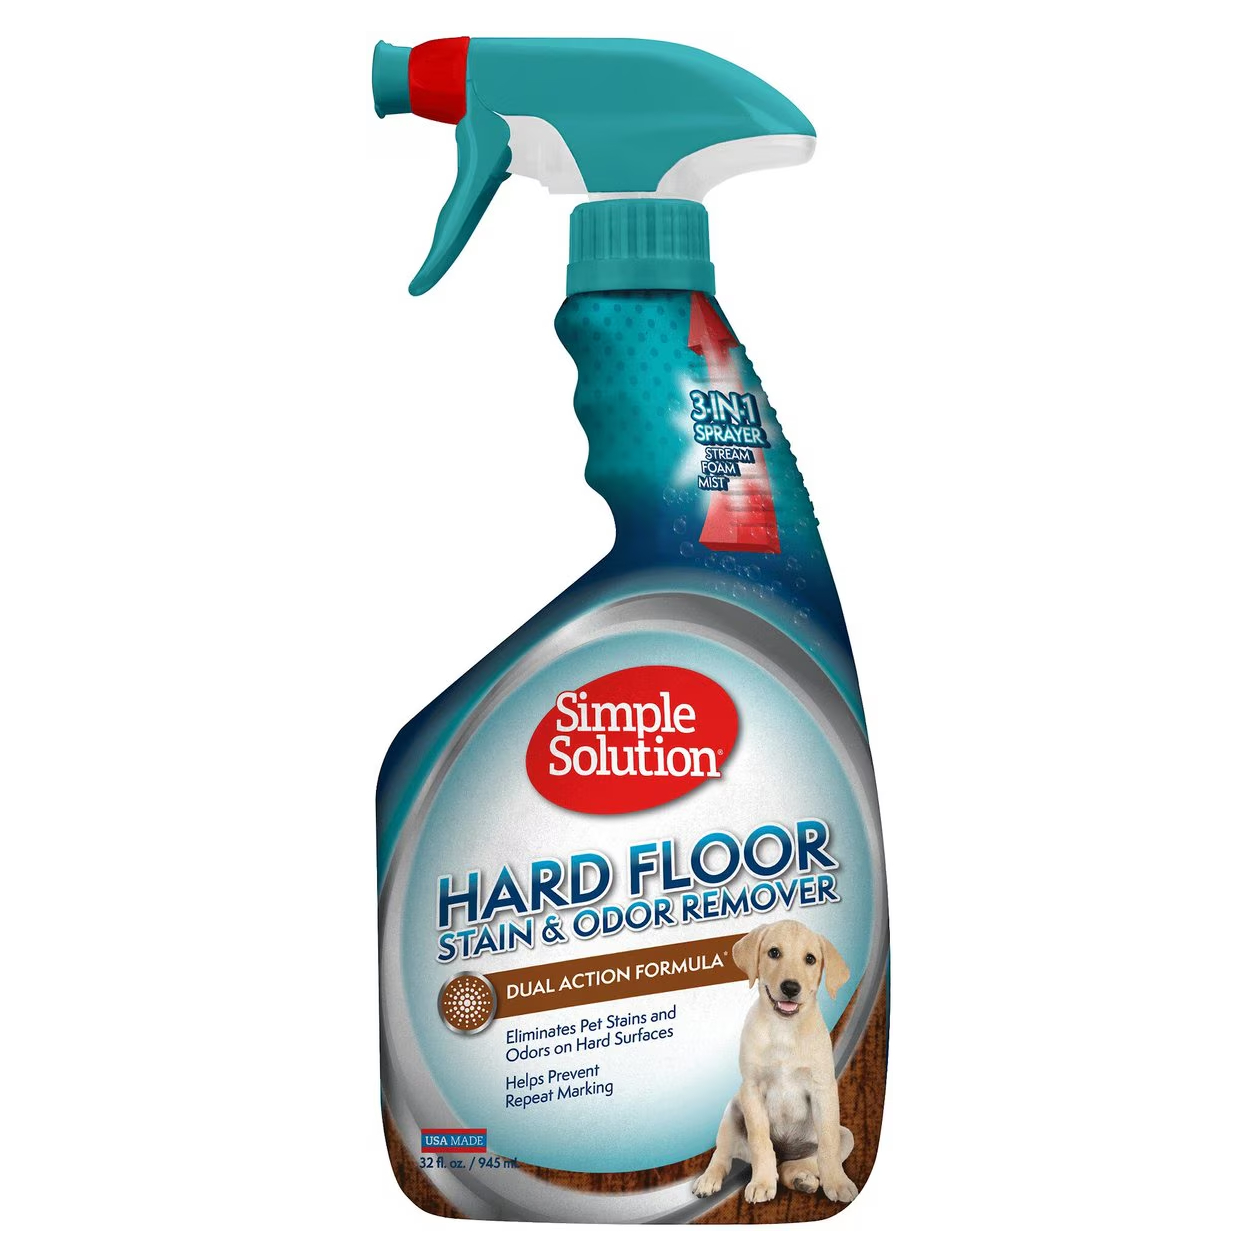 Simple Solution Hard Floor Stain & Odor Remover